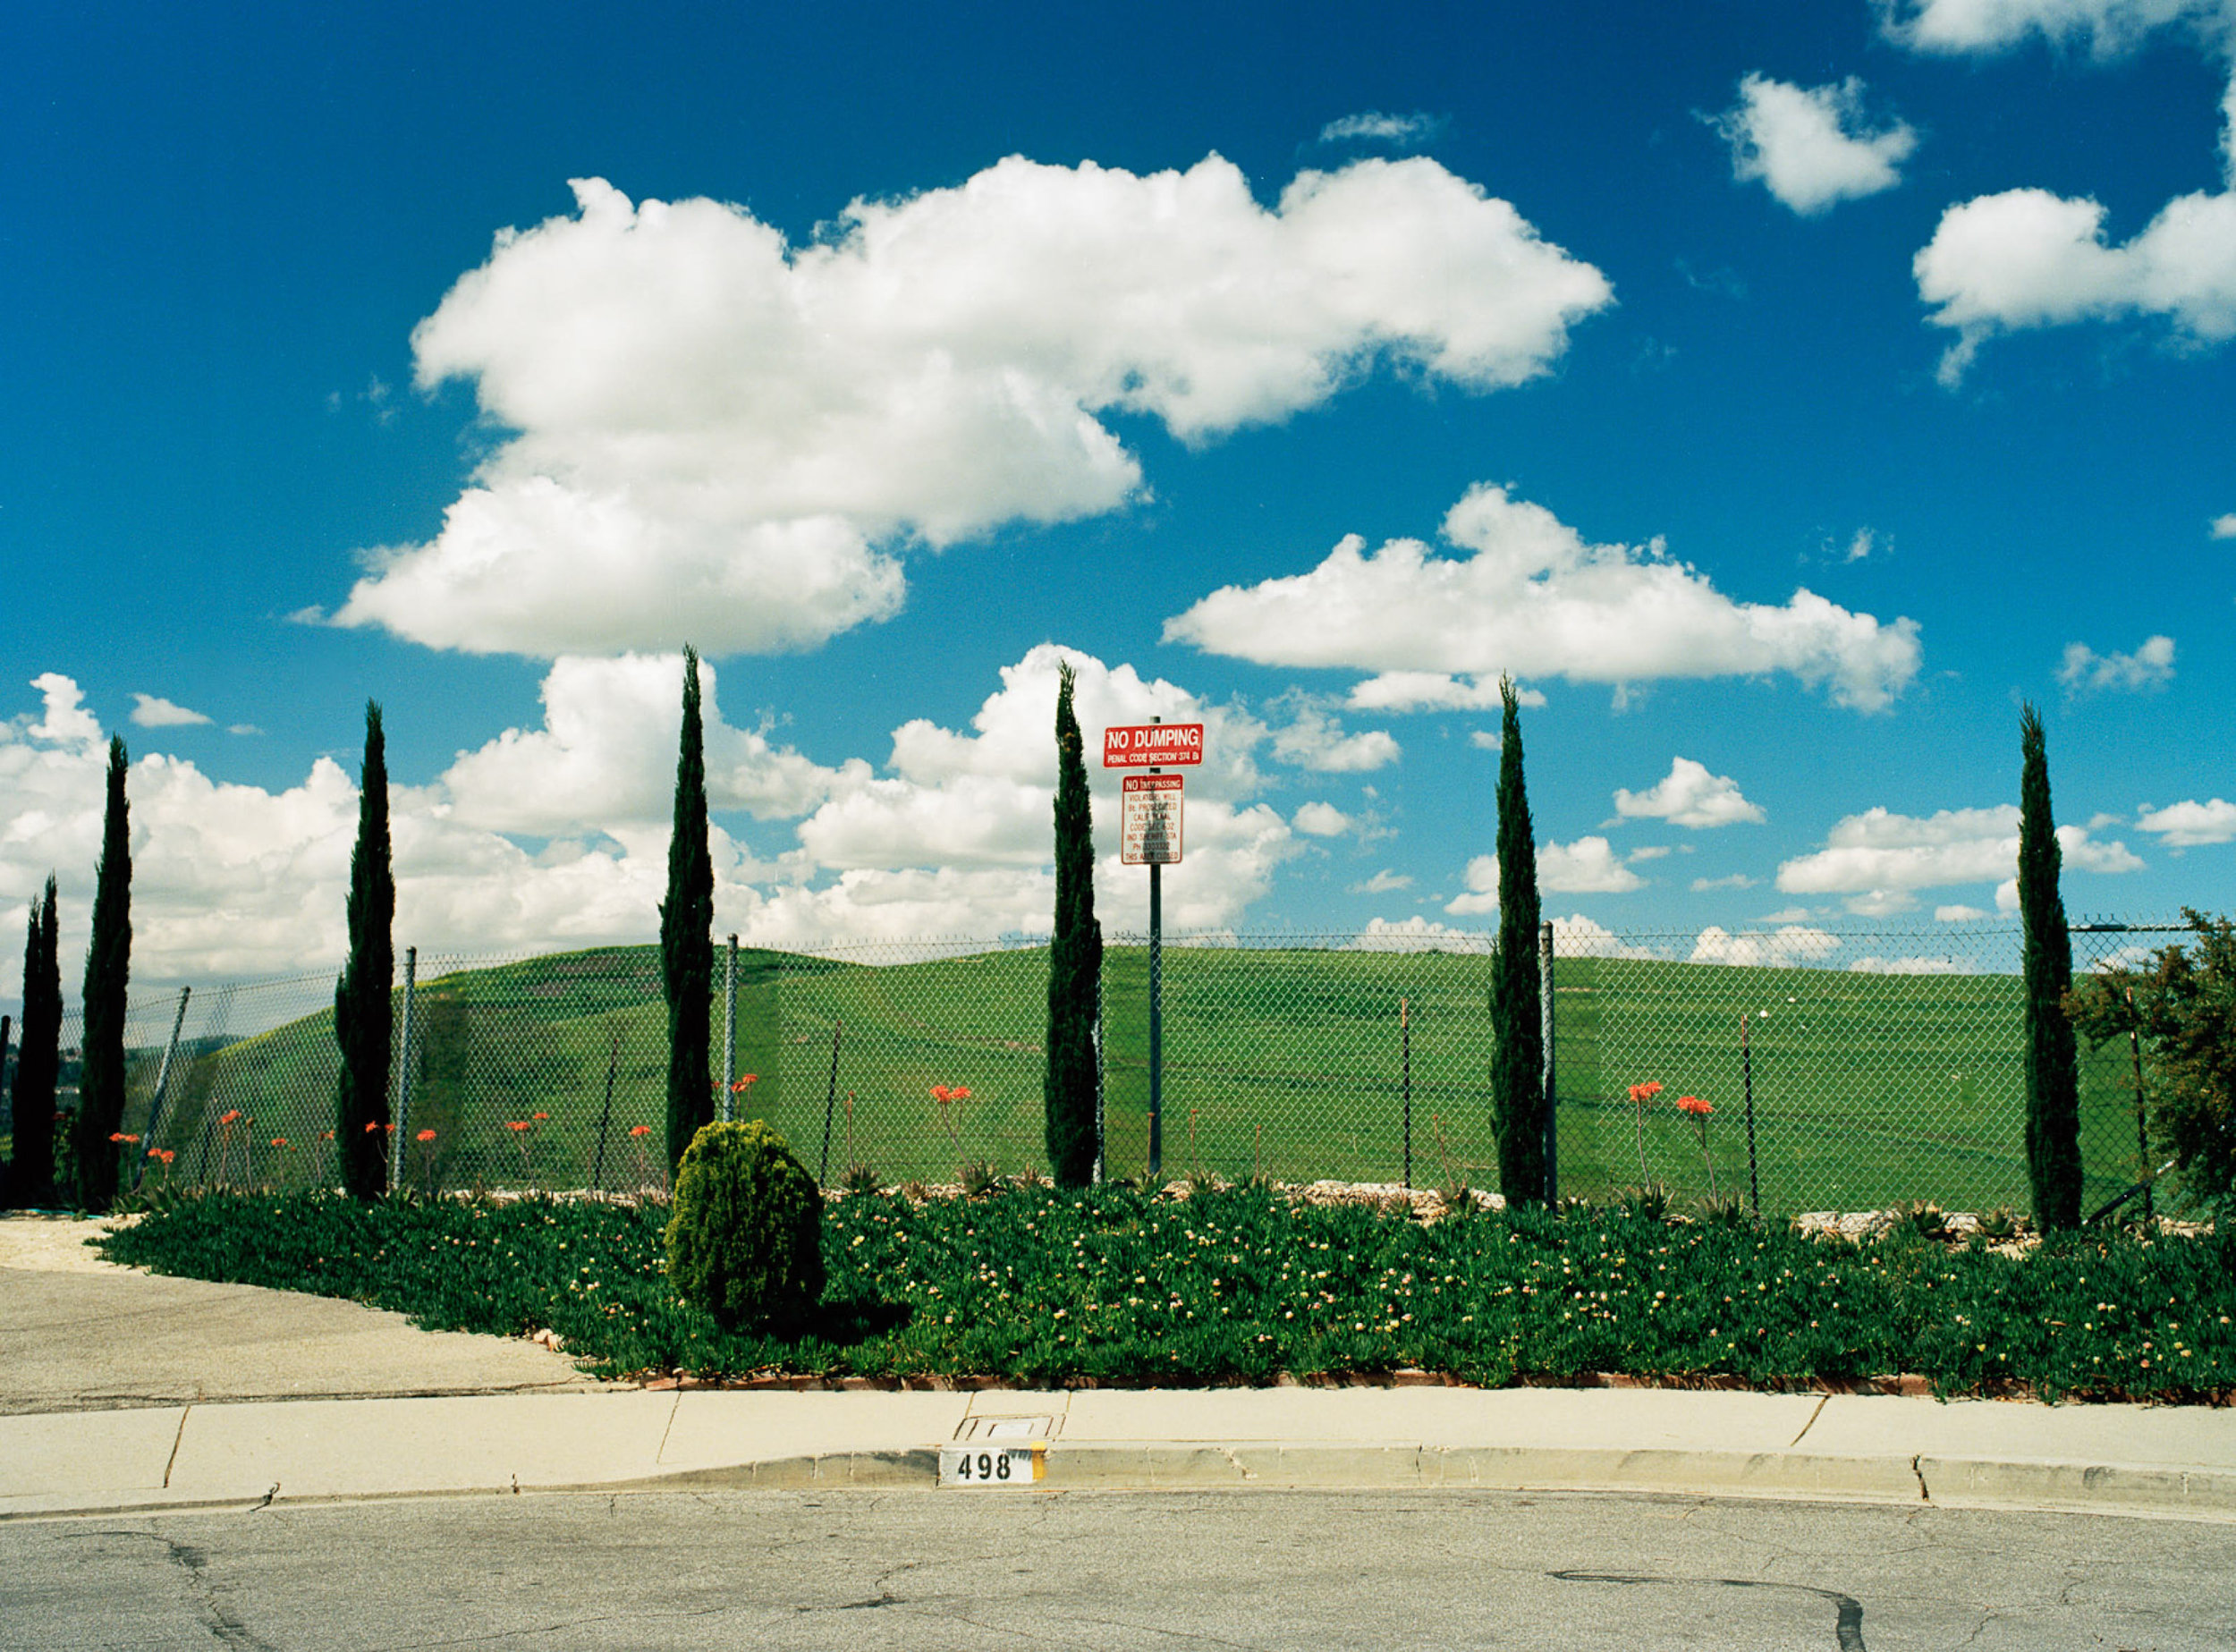   Utopia is an observation of the suburban neighborhoods I was raised in on the edge of Los Angeles County.  